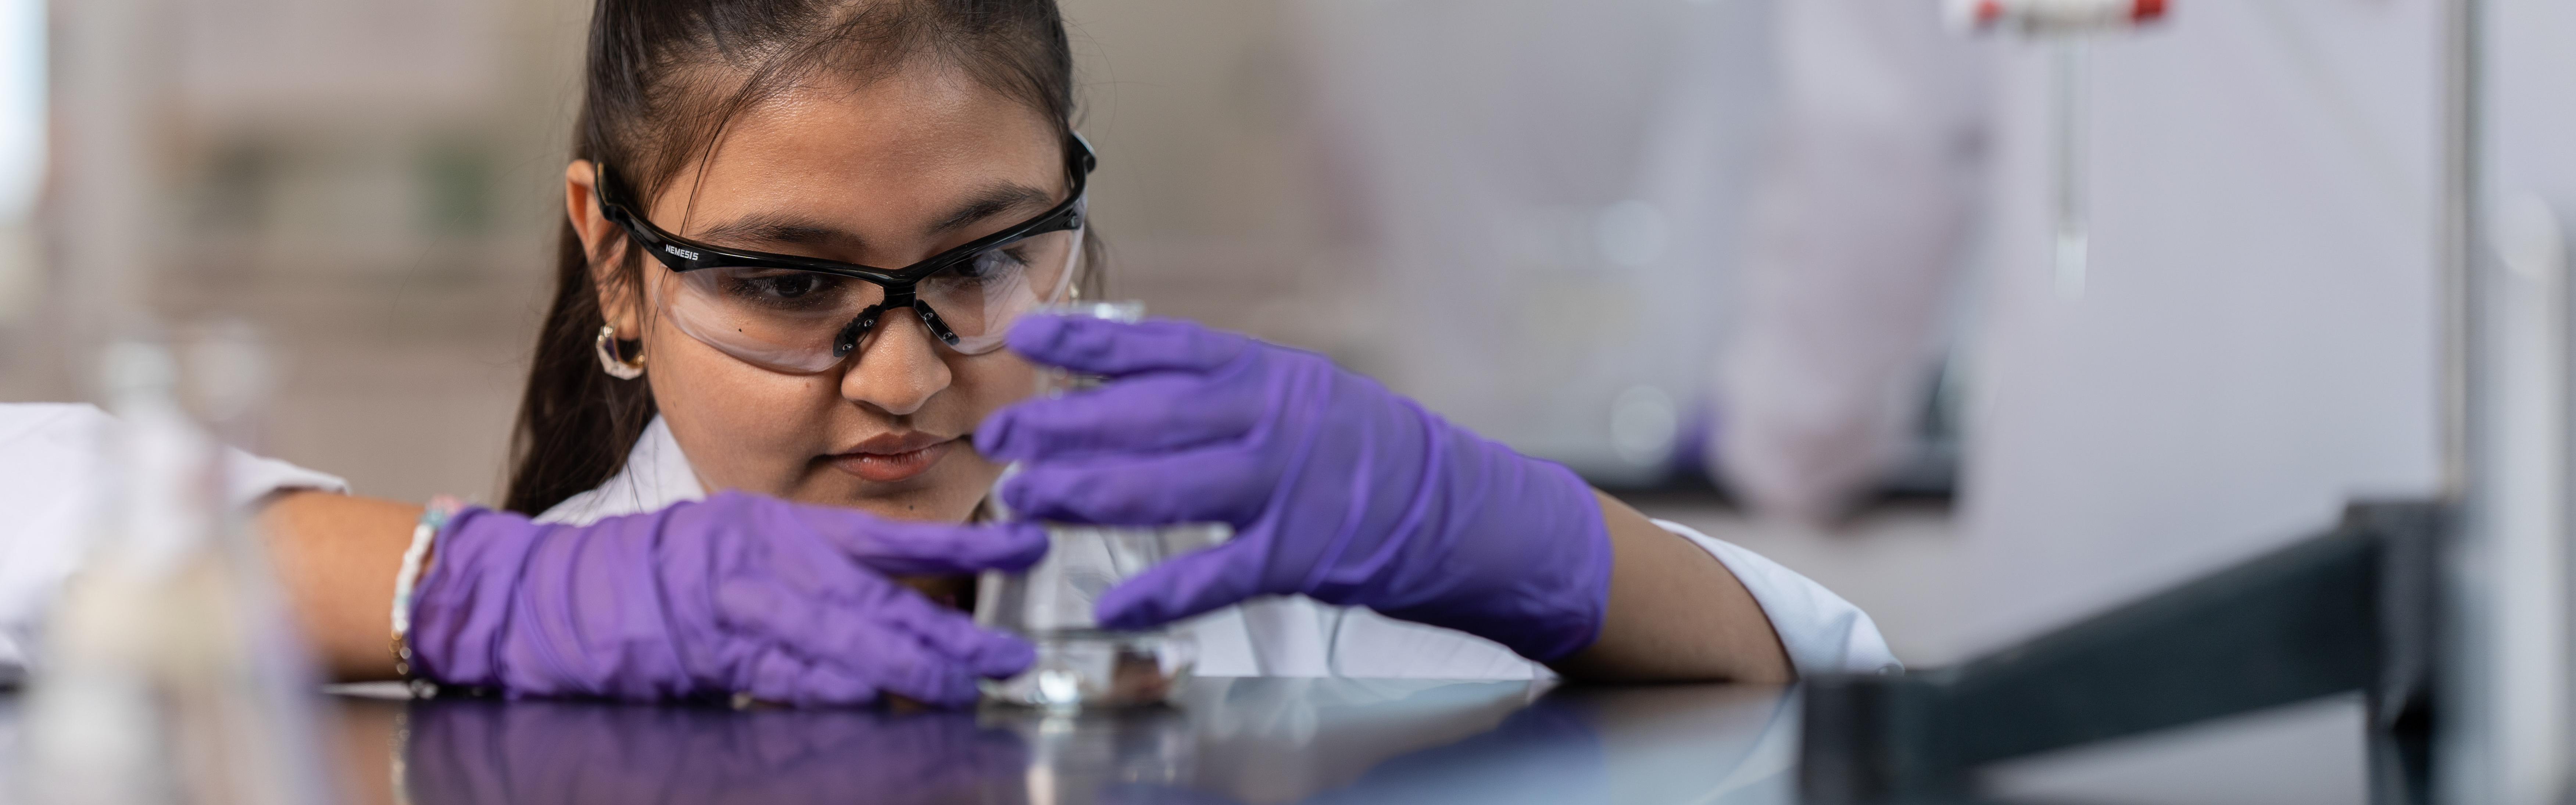 Student in a lab examining a beaker